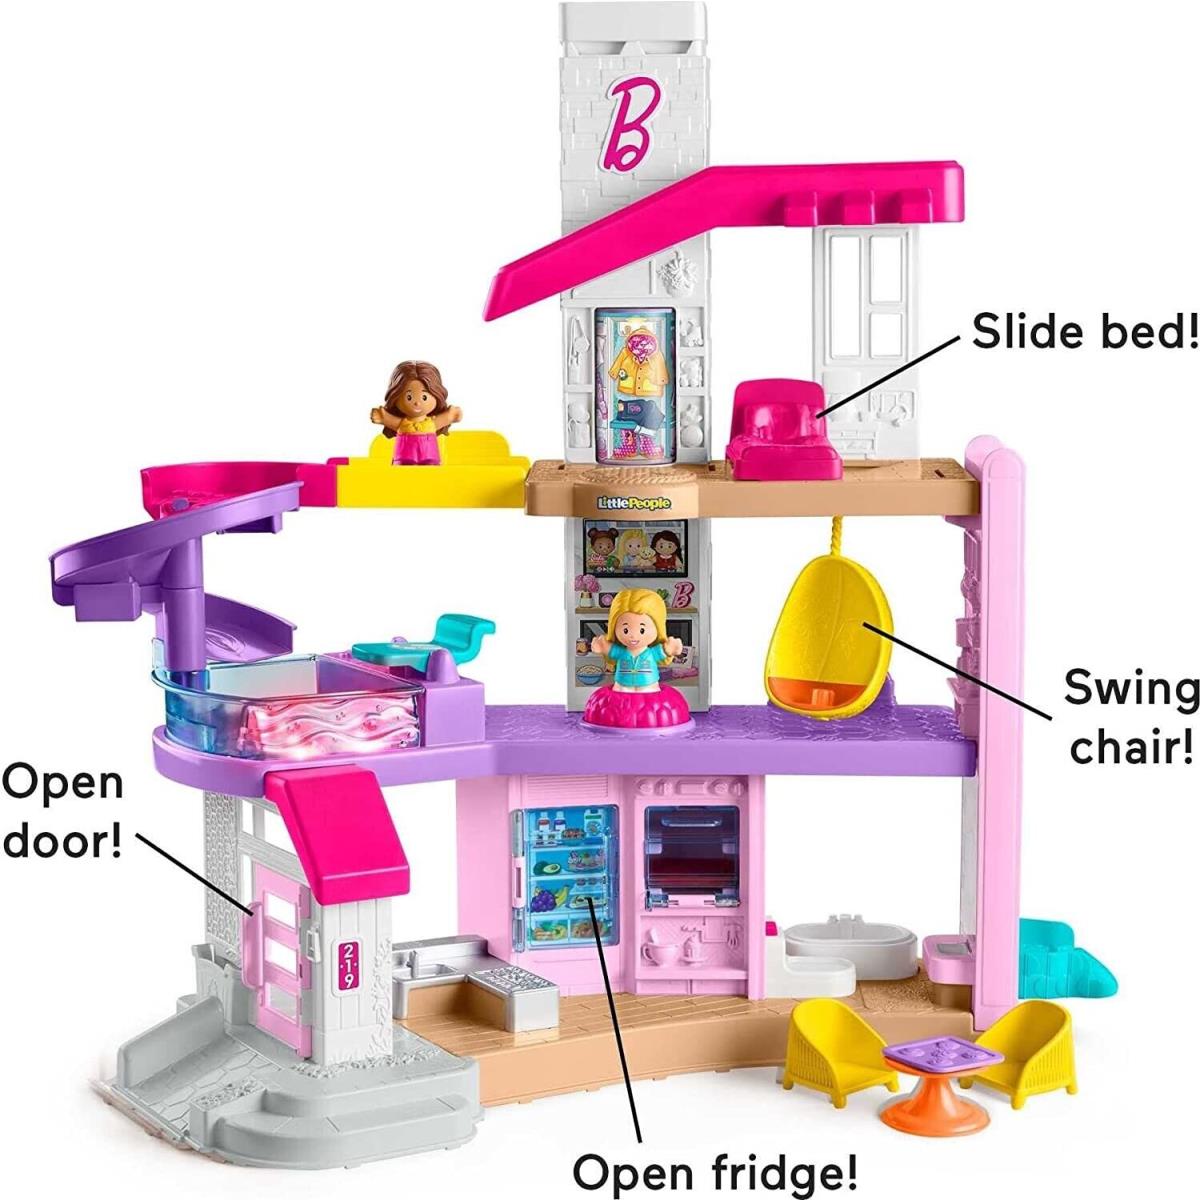 Barbie Toys Little Dreamhouse Interactive Toddler Playset Doll House For Girl